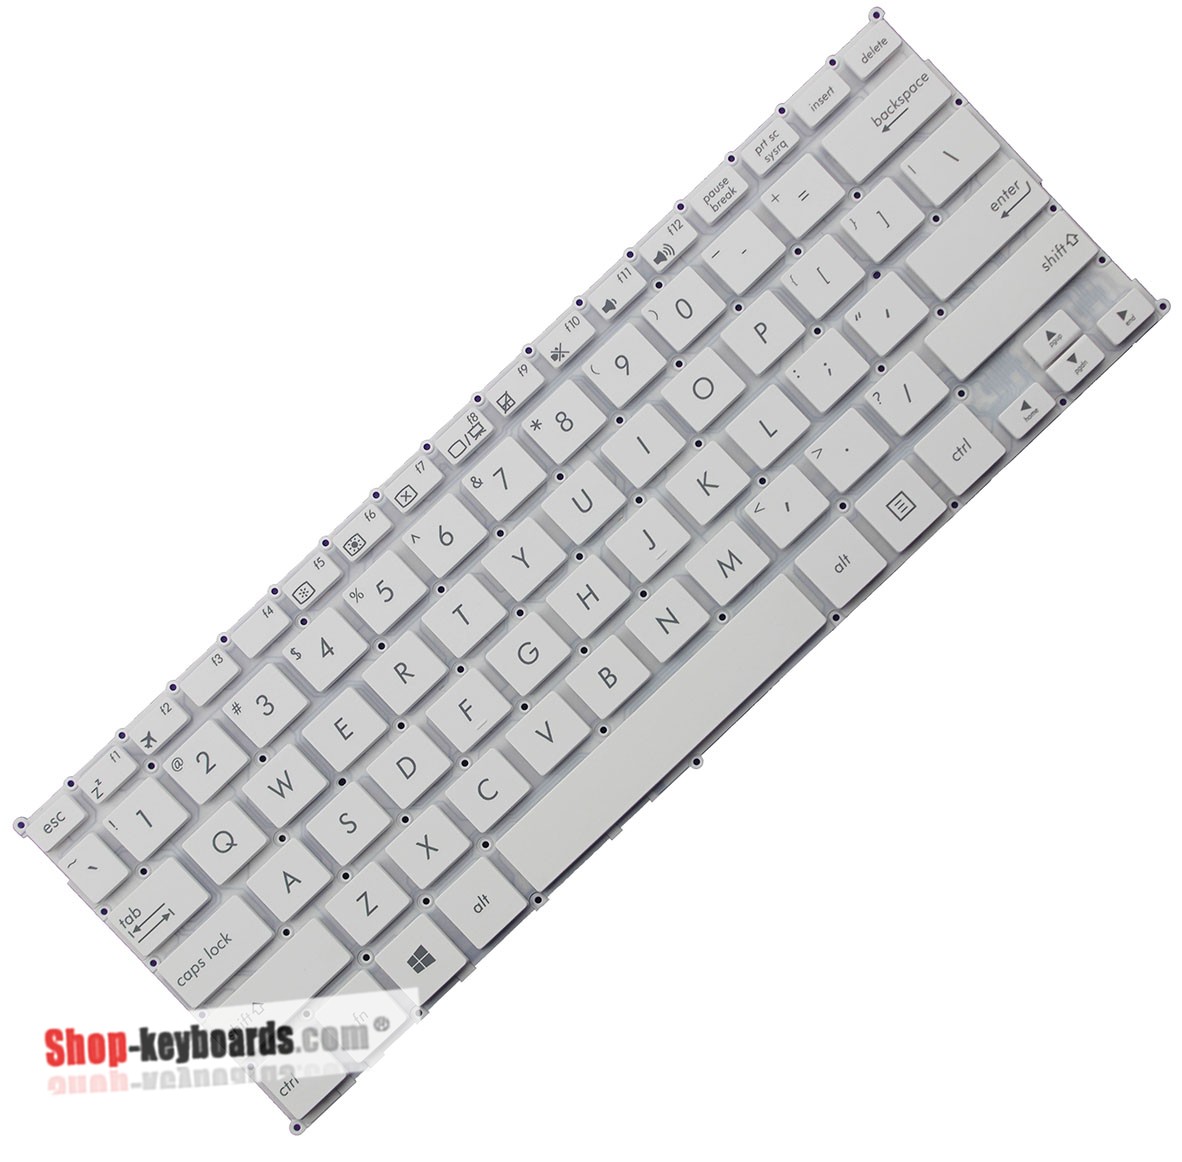 Asus 0KNL0-1123US00 Keyboard replacement